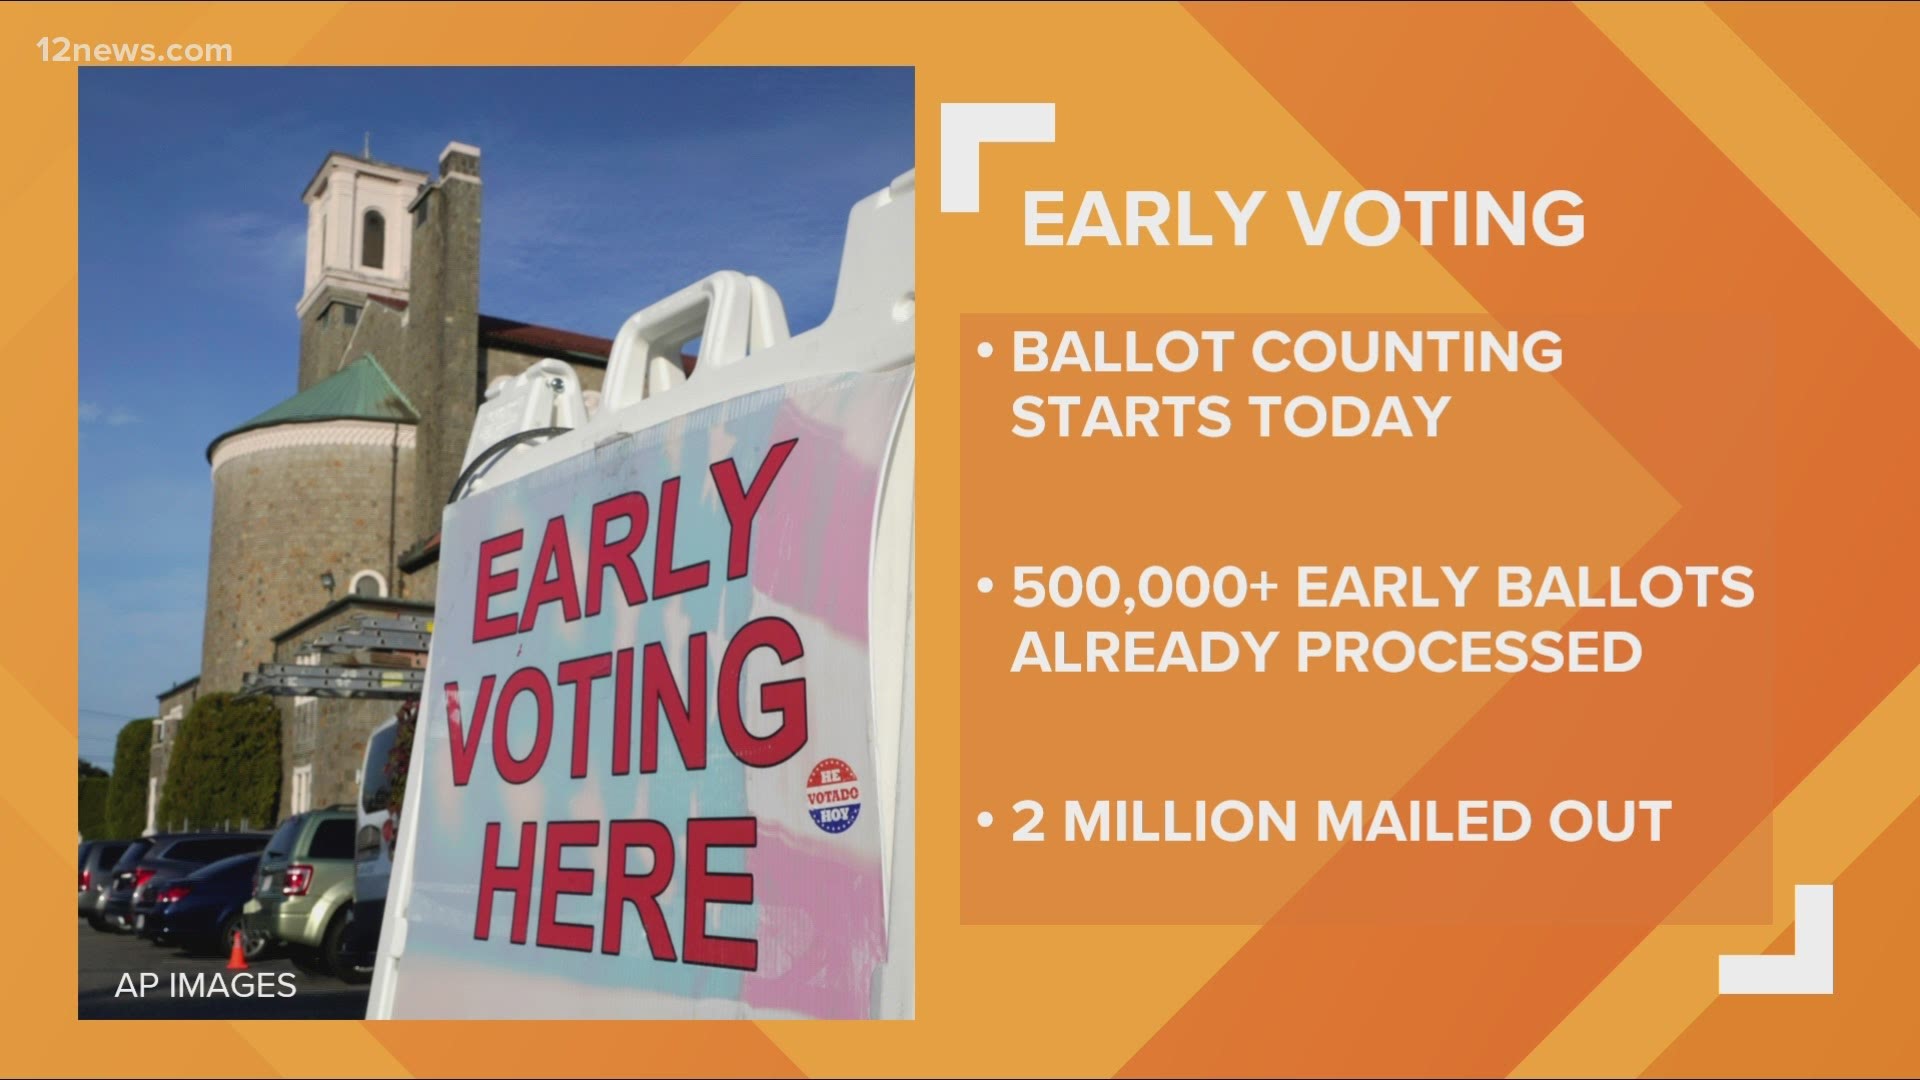 With just 14 days left until Election Day, workers will begin counting all the early ballots in Arizona starting Tuesday. Team 12's Rachel Cole has the latest.